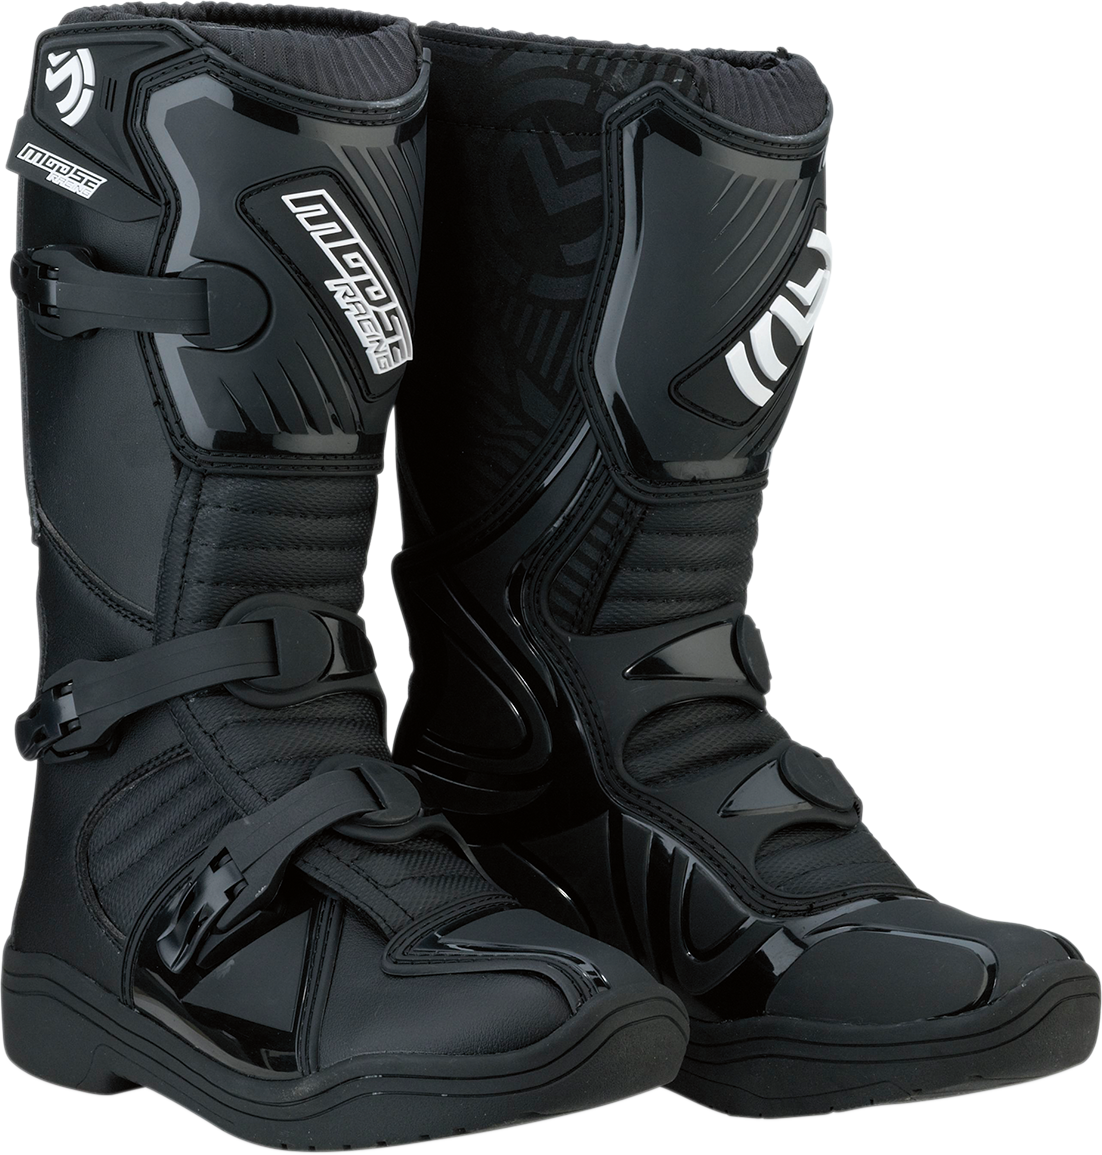 MOOSE RACING M1.3 Boots - Black - Size 1 3411-0423